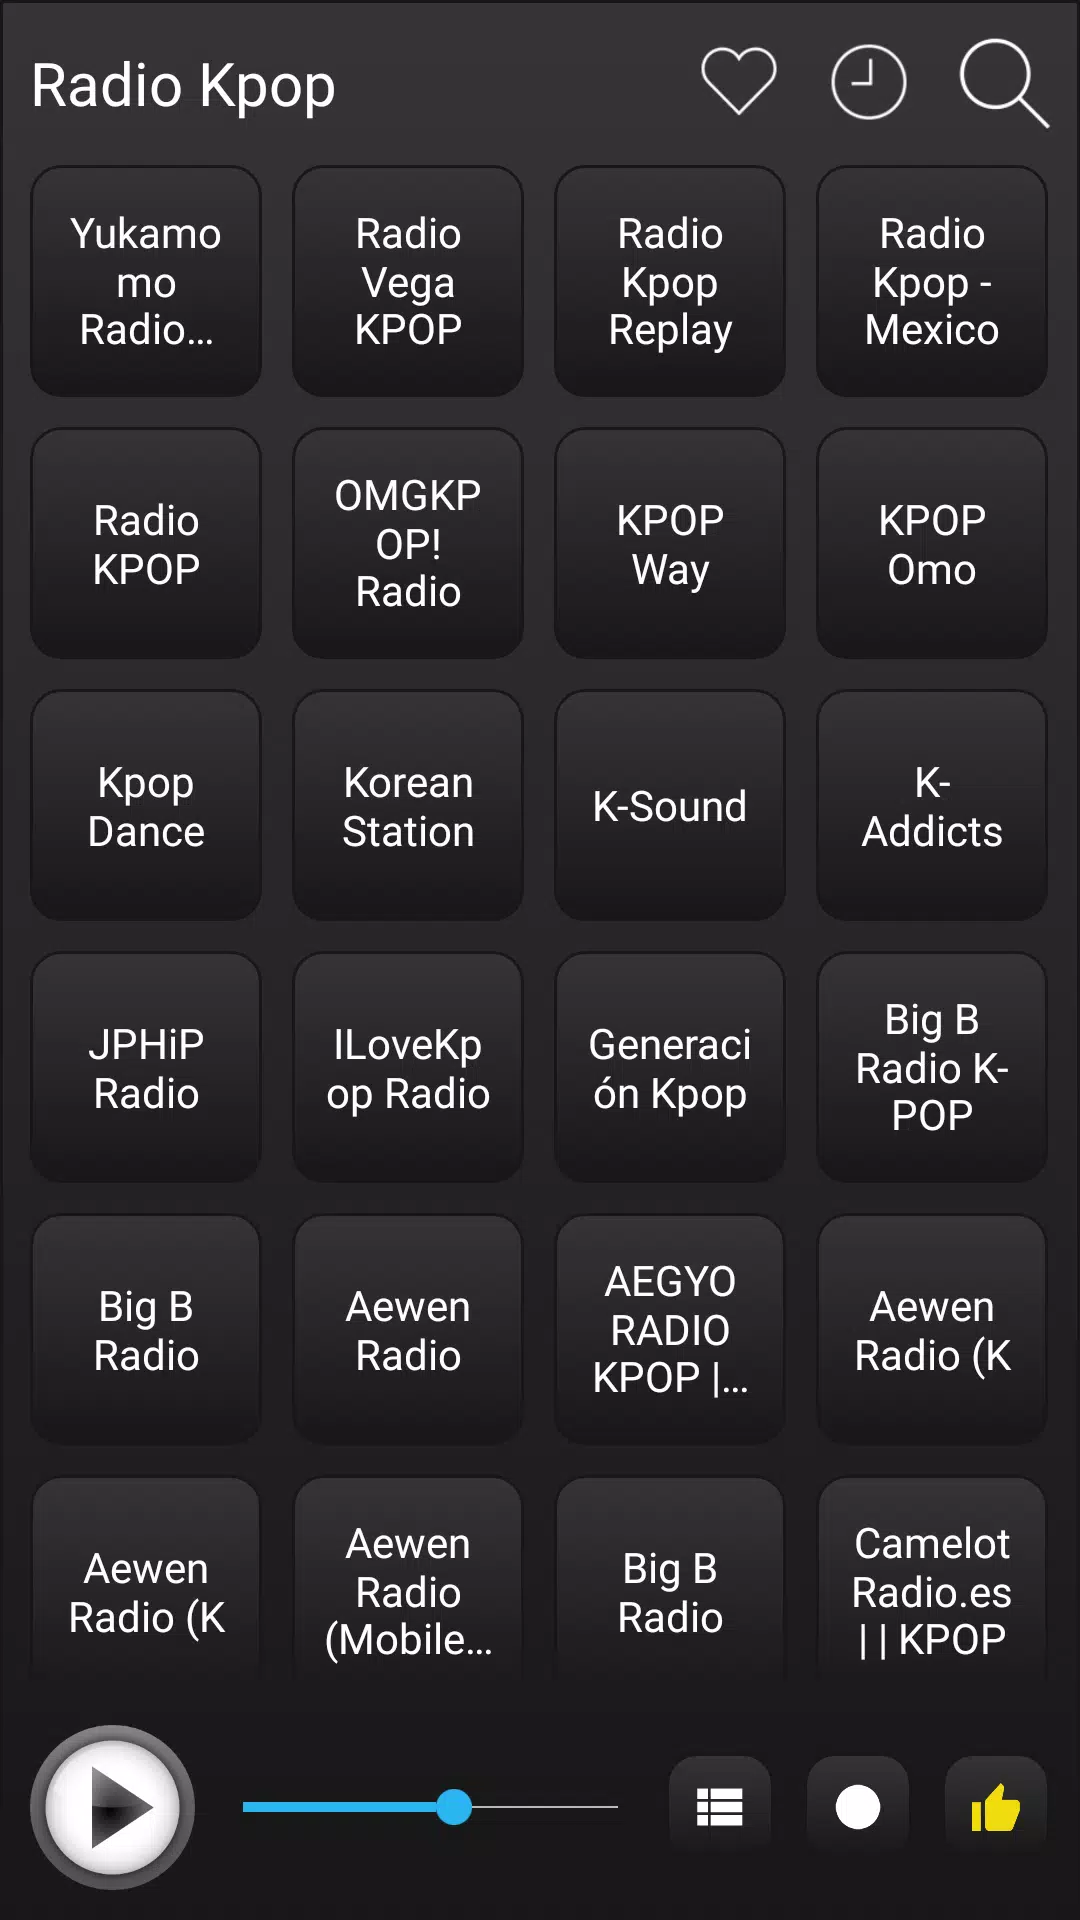 Kpop Radio Stations Online - Kpop FM Music / Songs for Android - APK  Download